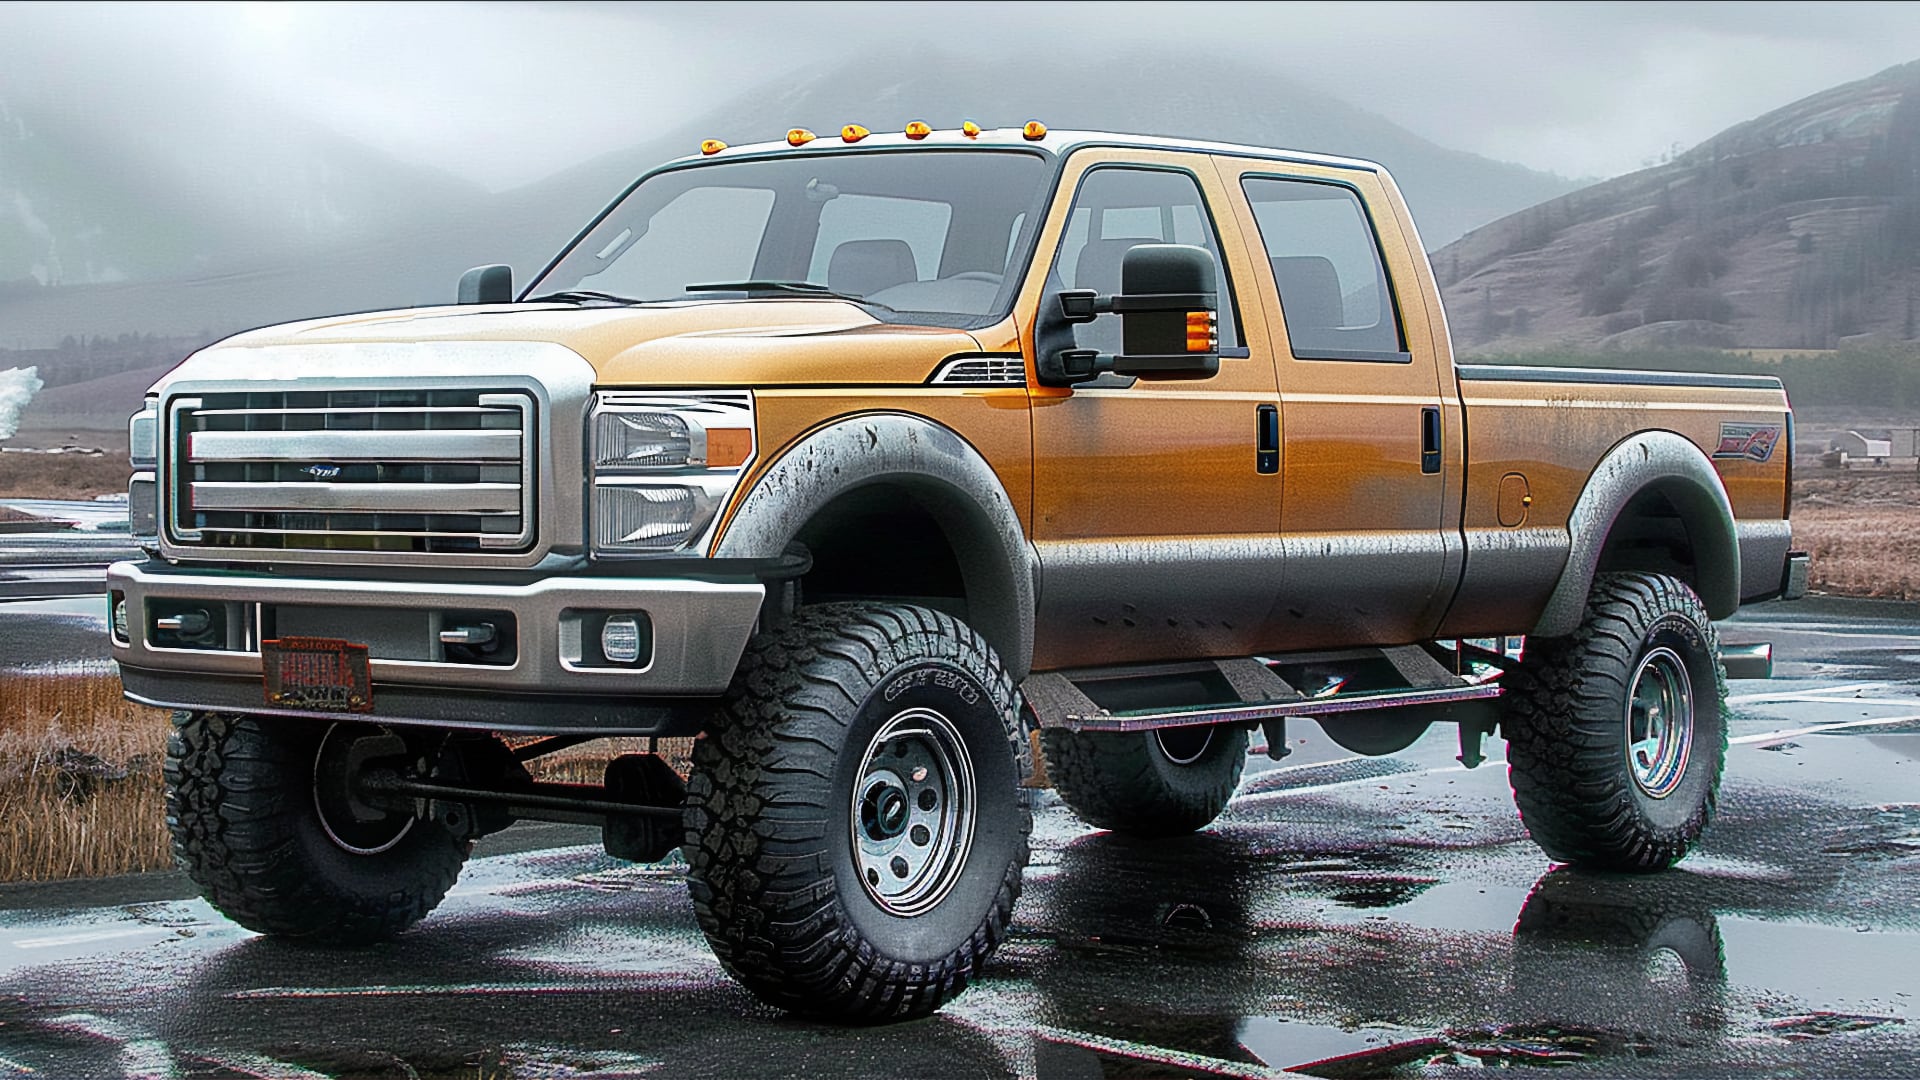 An older Ford F-250 super duty truck is parked in a parking lot.